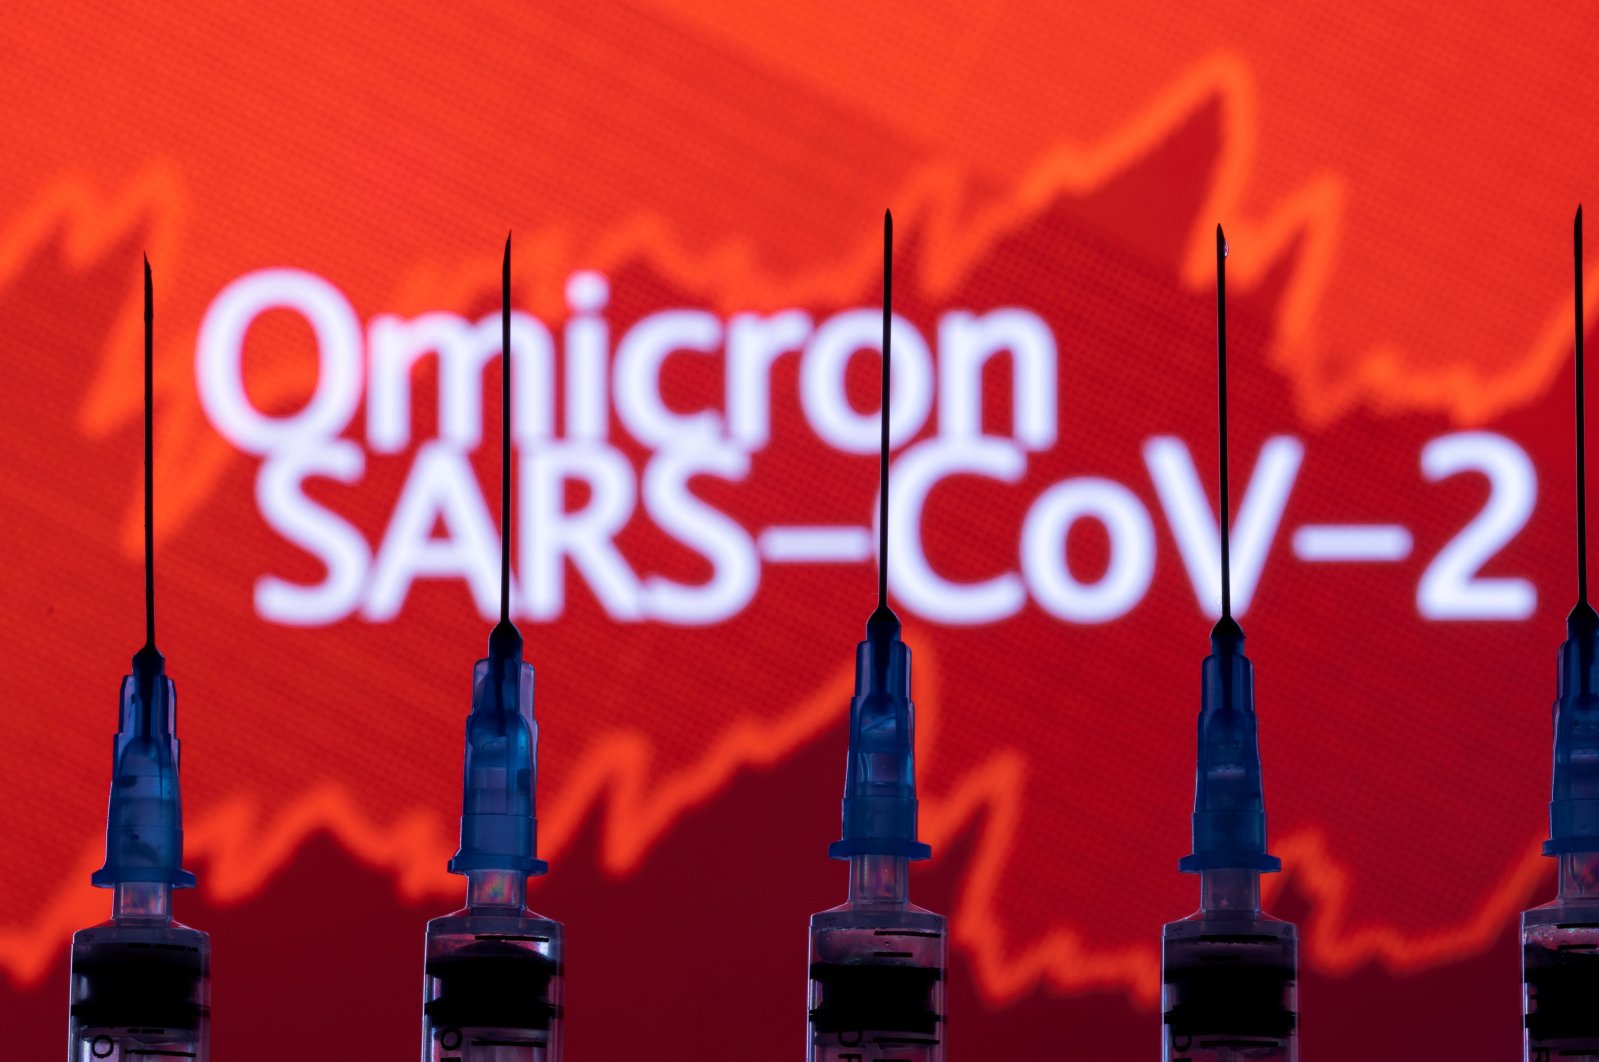 Syringes with needles are seen in front of a displayed stock illustration, Nov. 27, 2021. (REUTERS/Dado Ruvic)